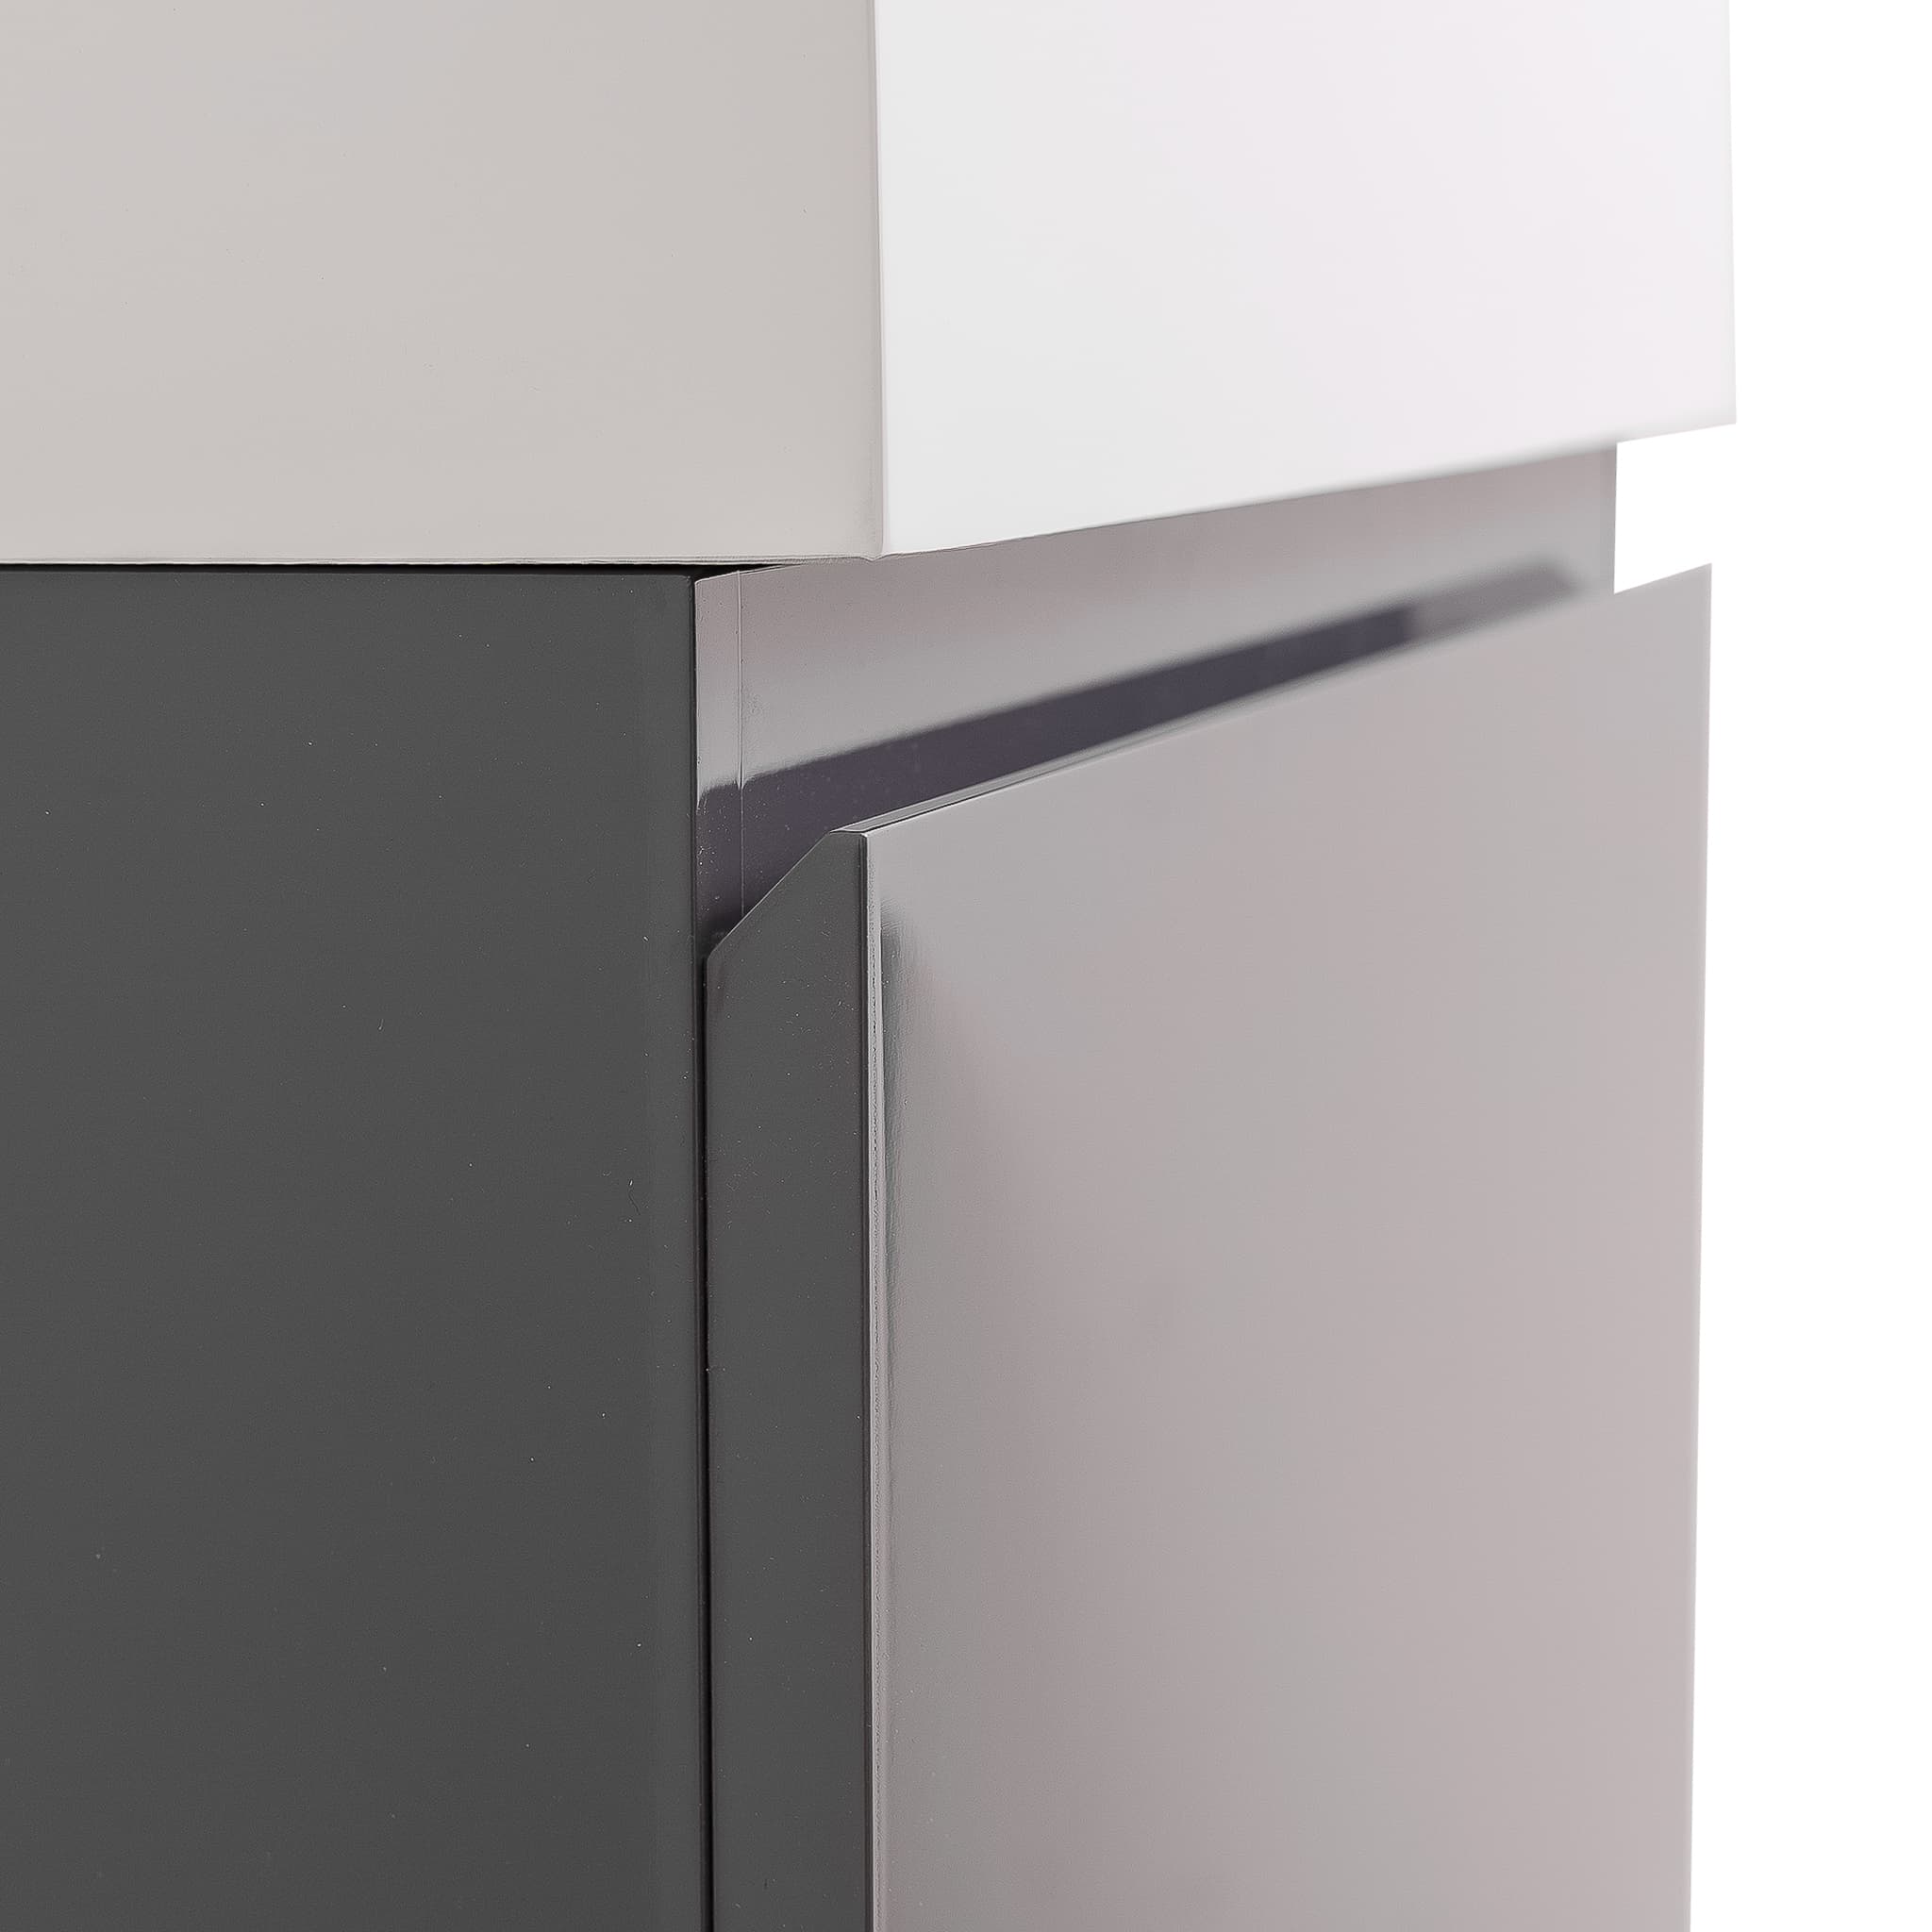 Venice 23.5 Anthracite High Gloss Cabinet, Square Cultured Marble Sink, Wall Mounted Modern Vanity Set